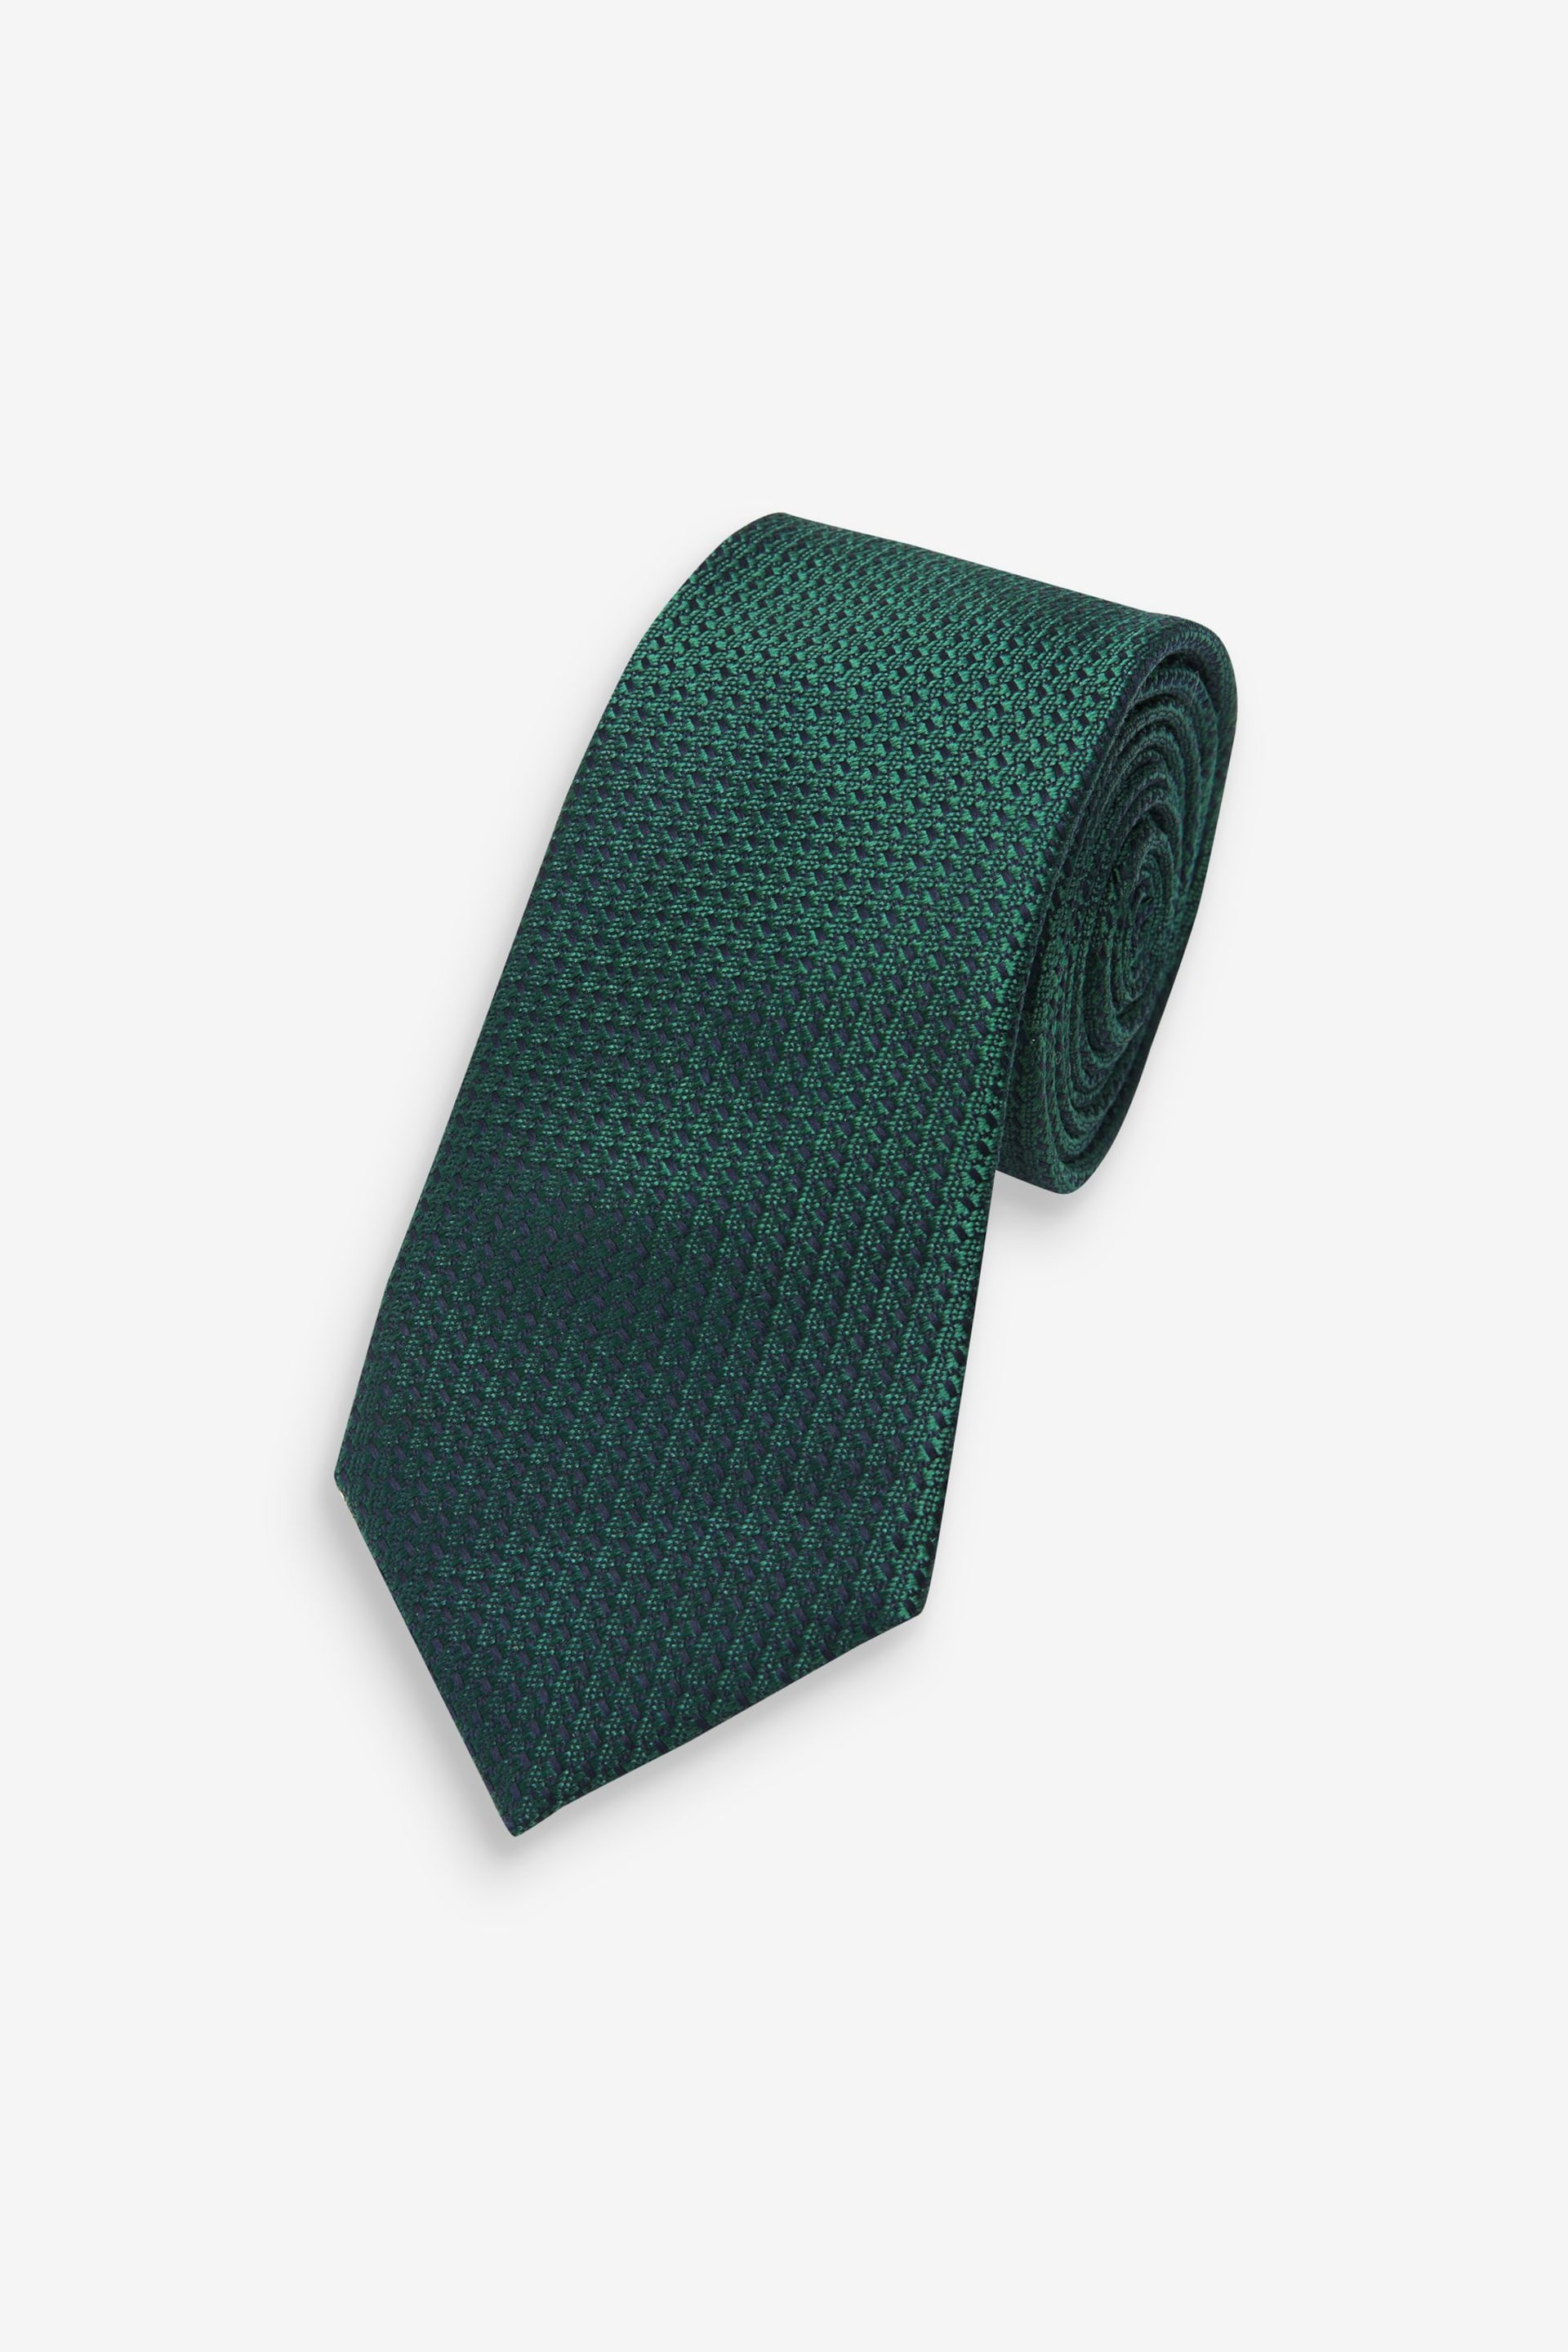 Forest Green Textured Silk Tie - Image 1 of 3